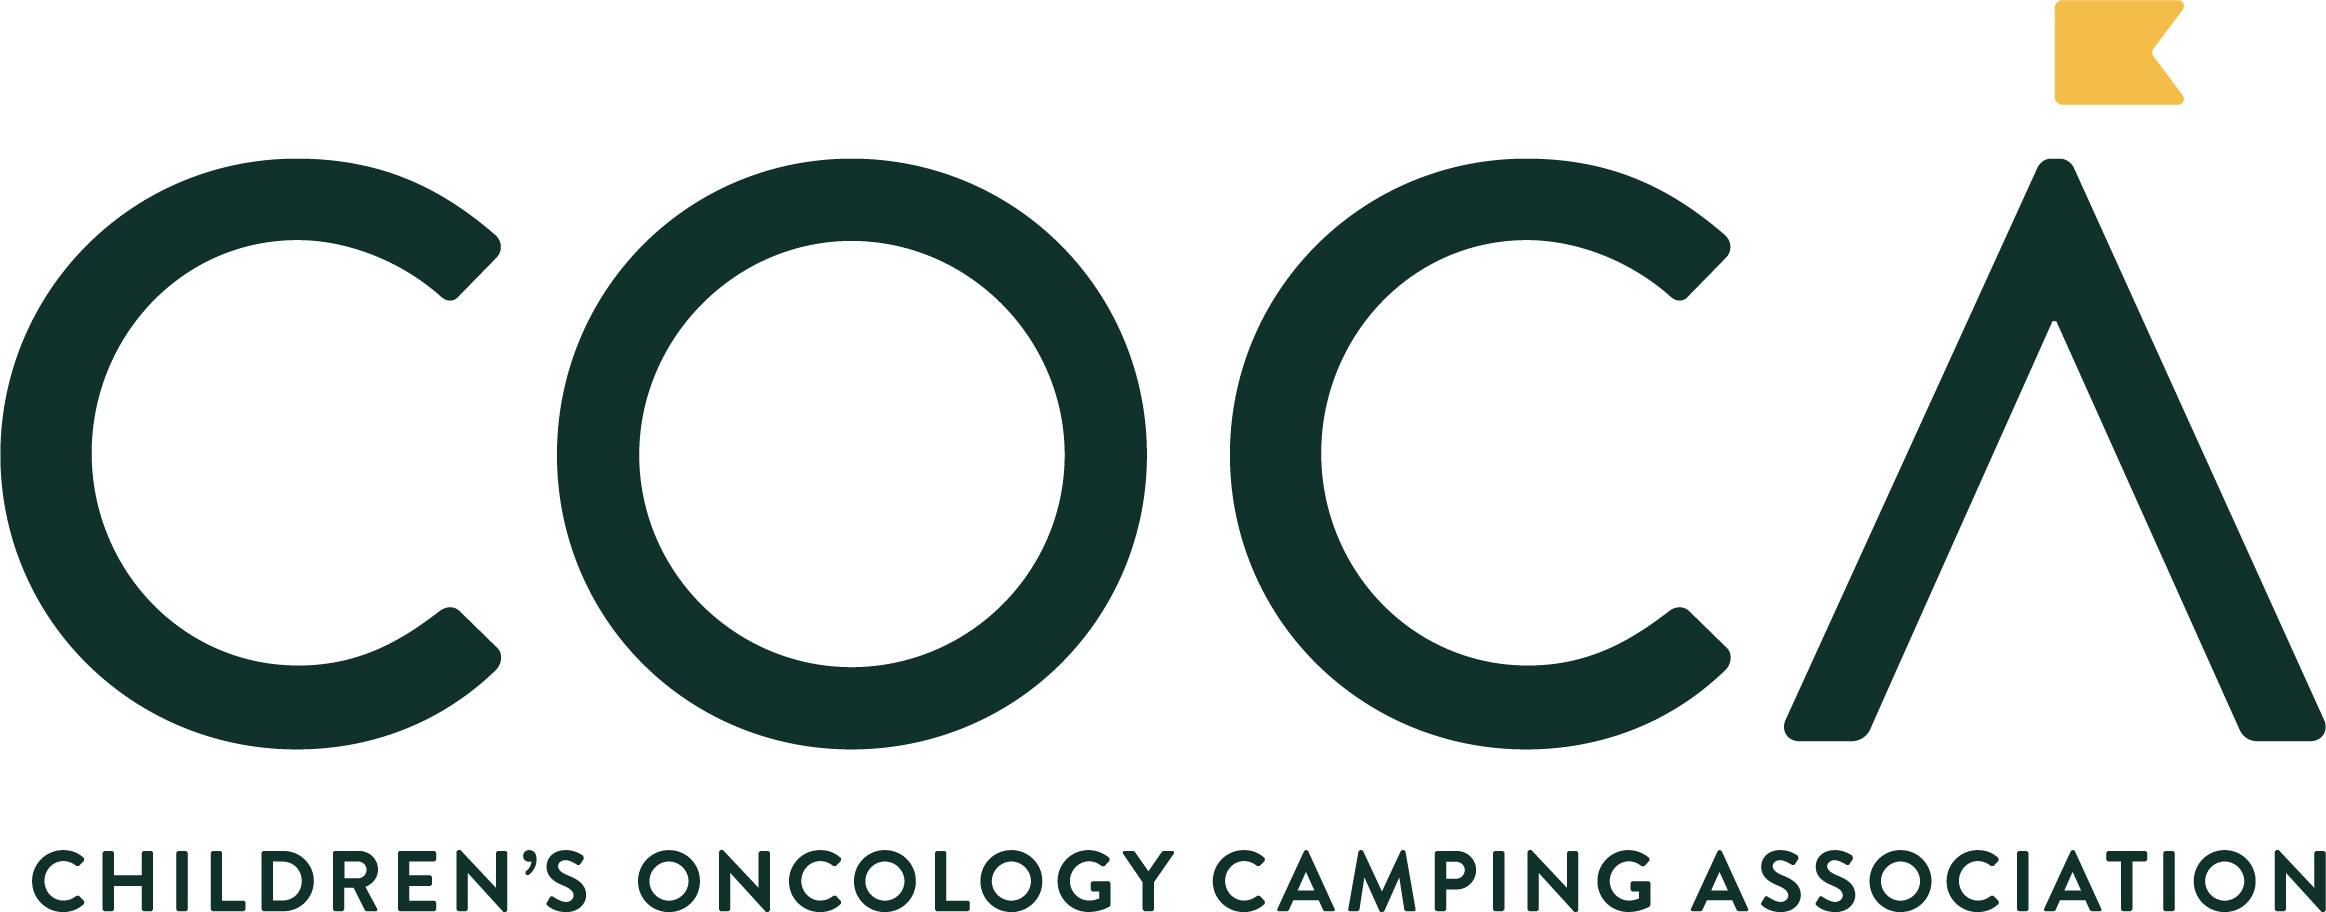 Children’s Oncology Camping Ass'n Int'l (C.O.C.A.I.) Gold Ribbon Camp